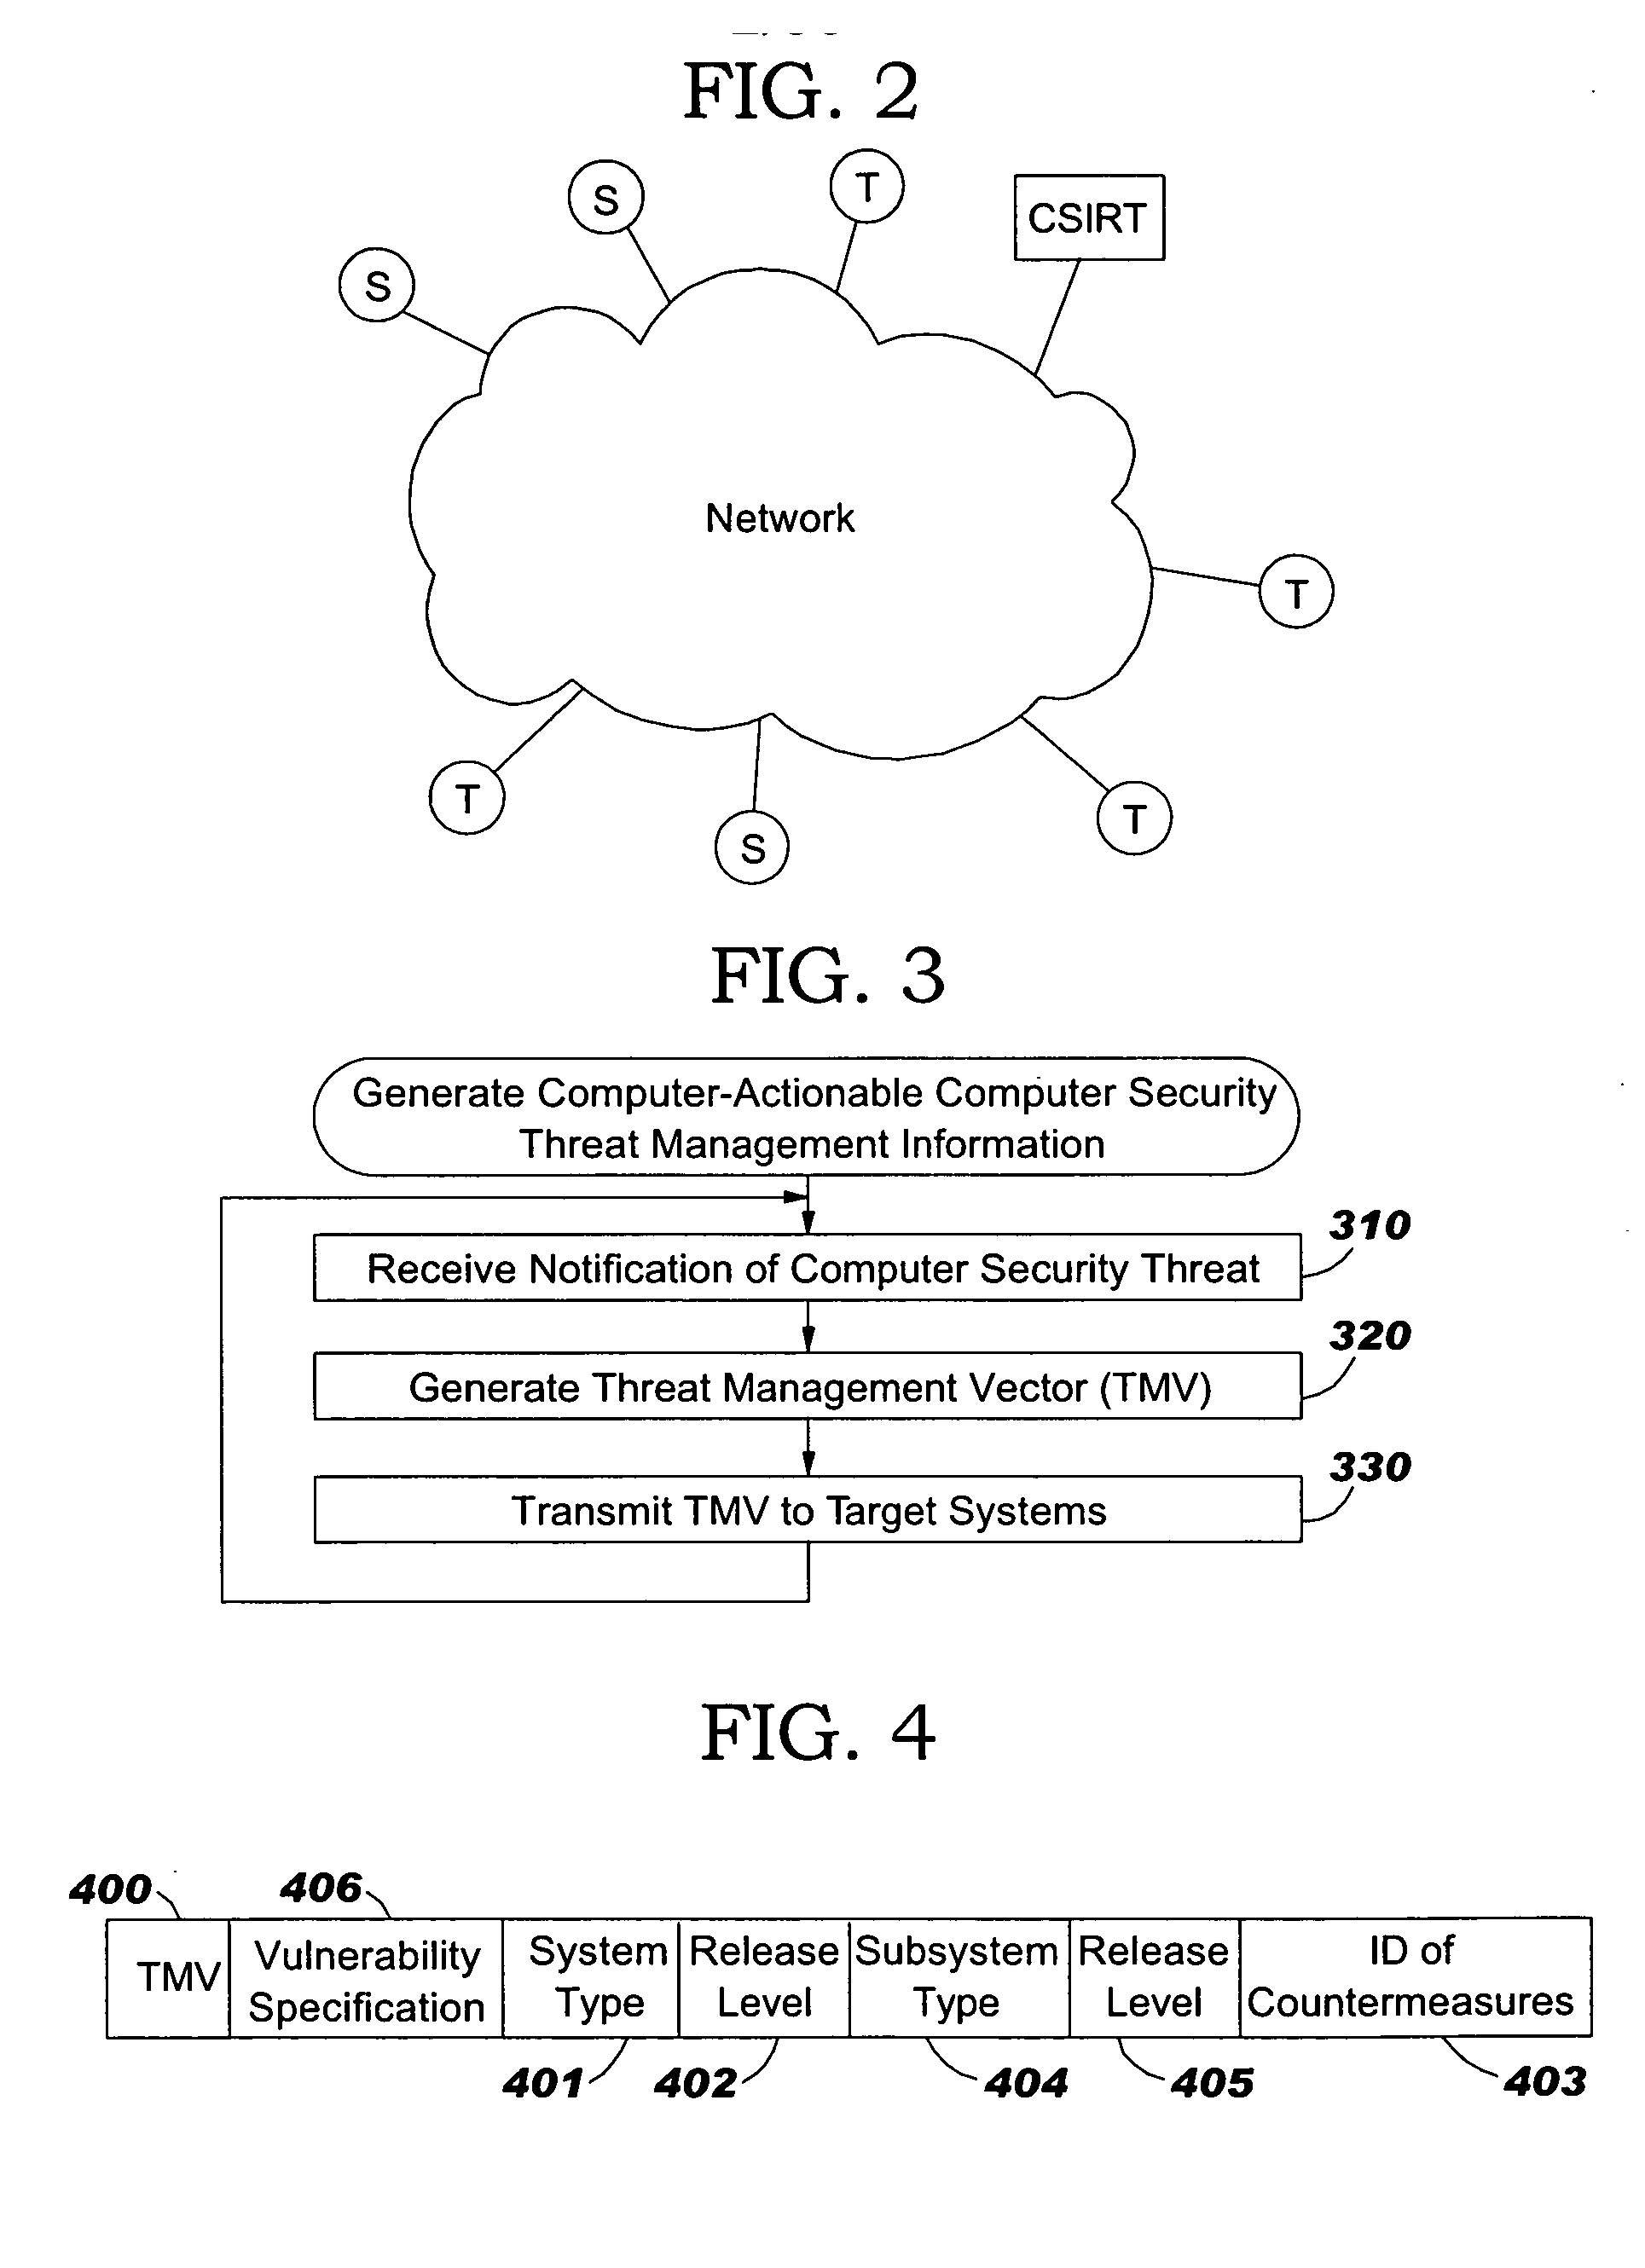 Domain controlling systems, methods and computer program products for administration of computer security threat countermeasures to a domain of target computer systems